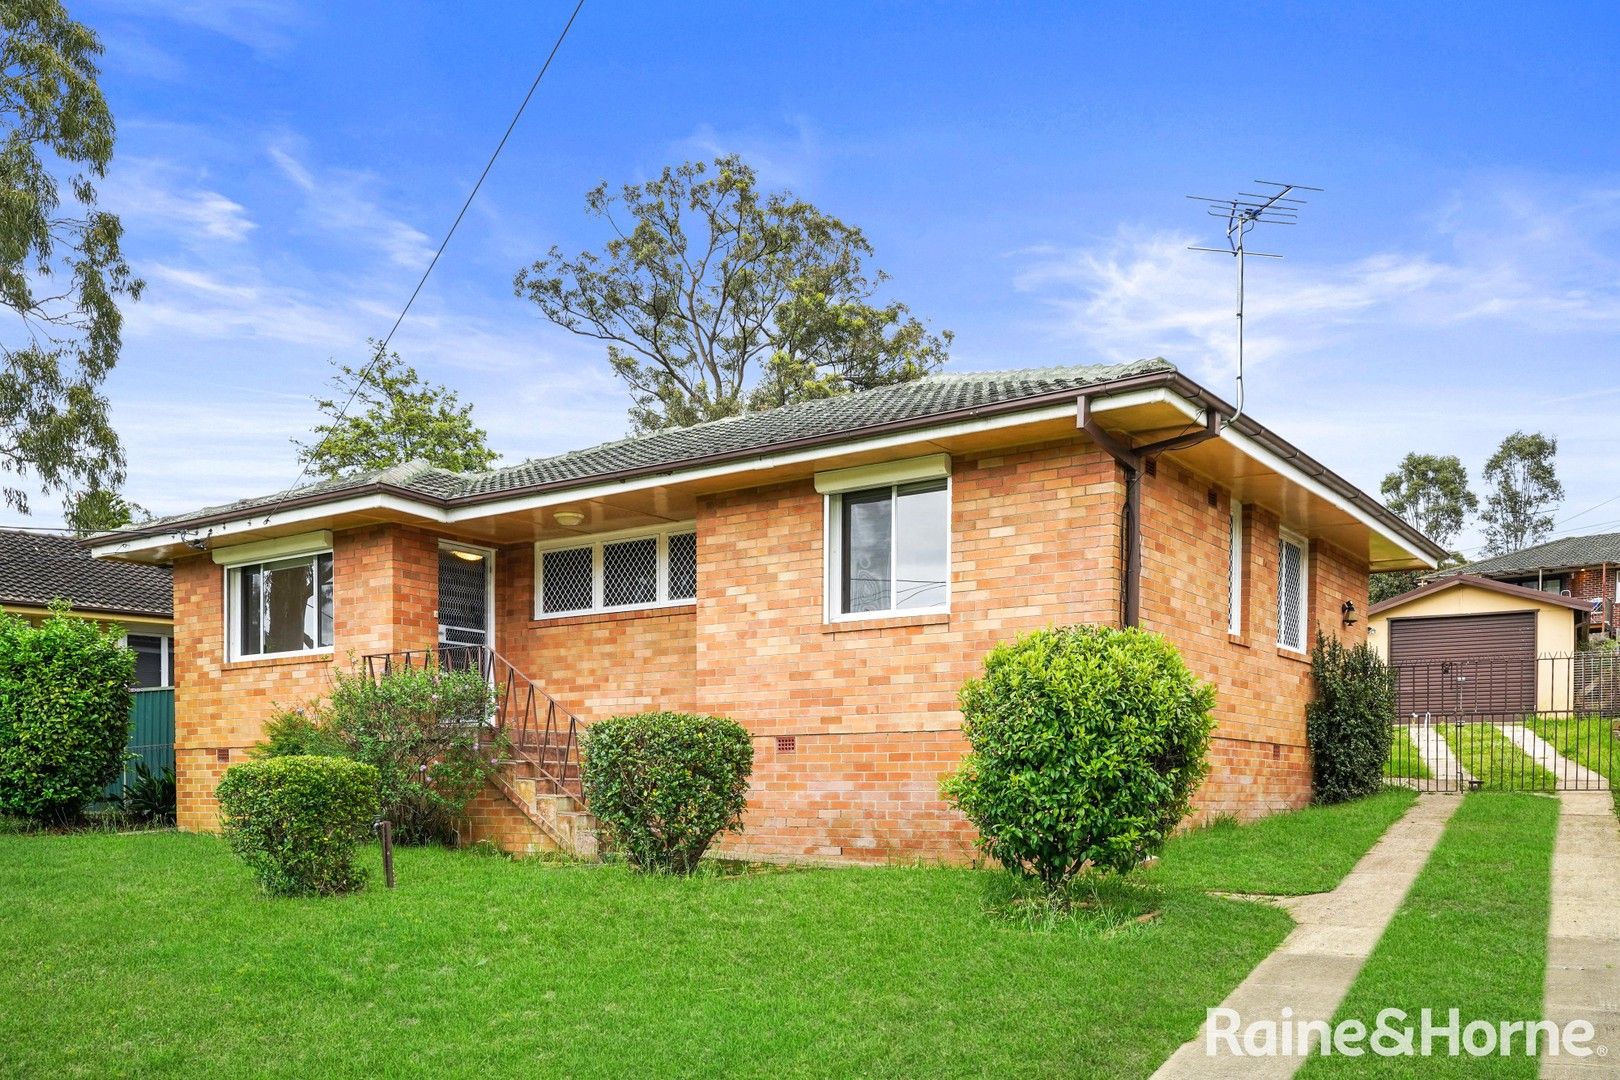 3 bedrooms House in 10 Mawson Road TREGEAR NSW, 2770